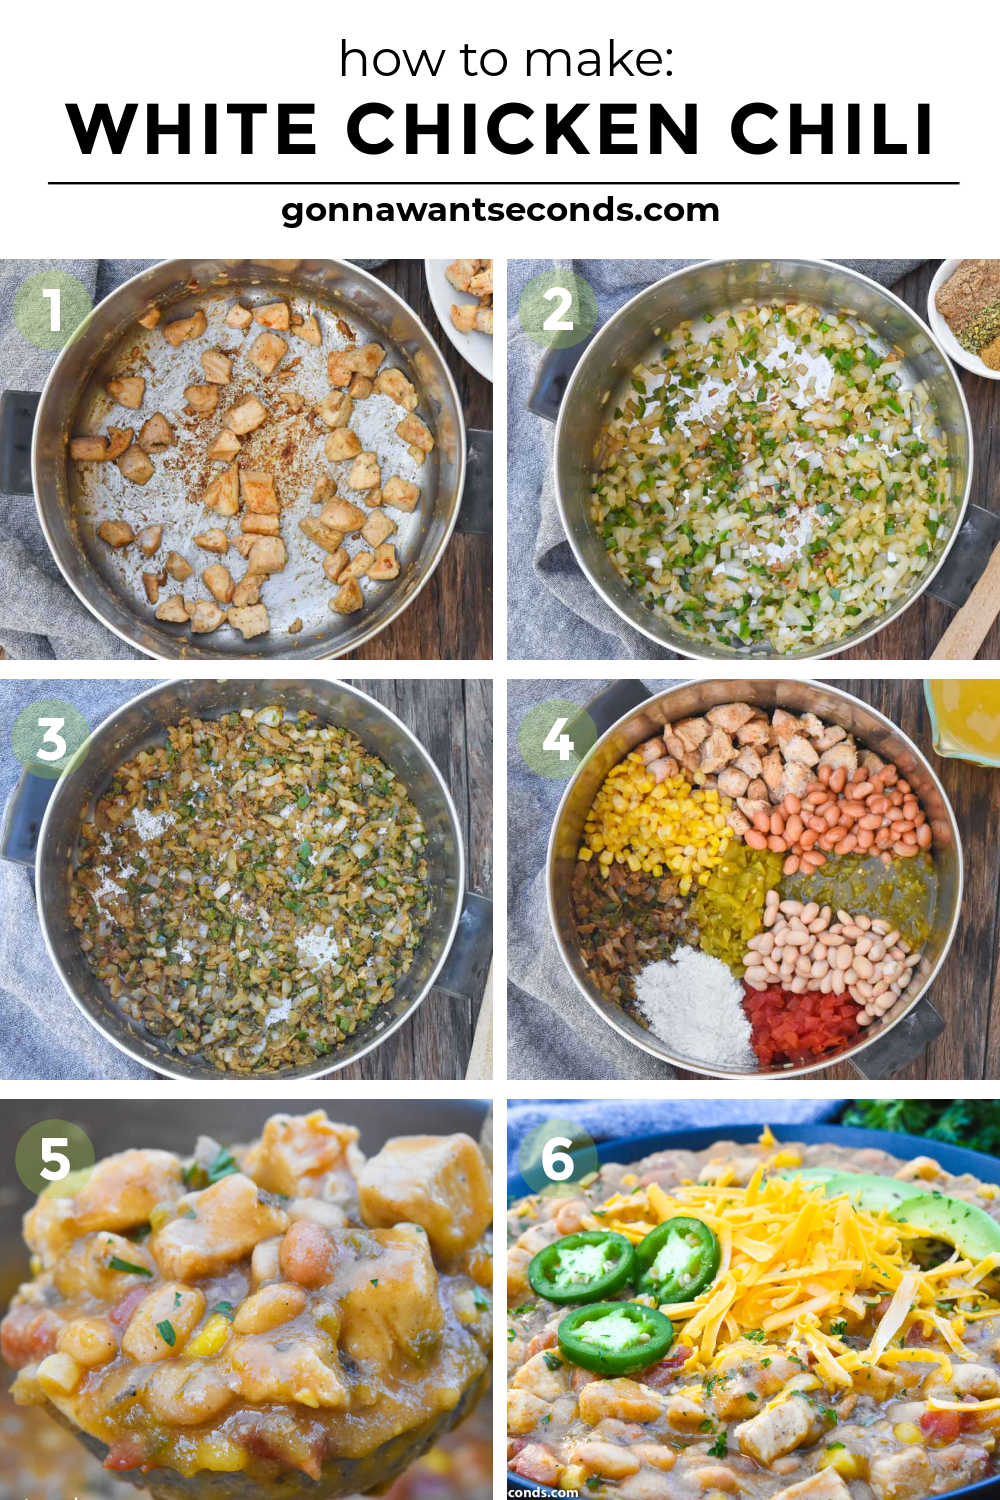 Step by step how to make white chicken chili